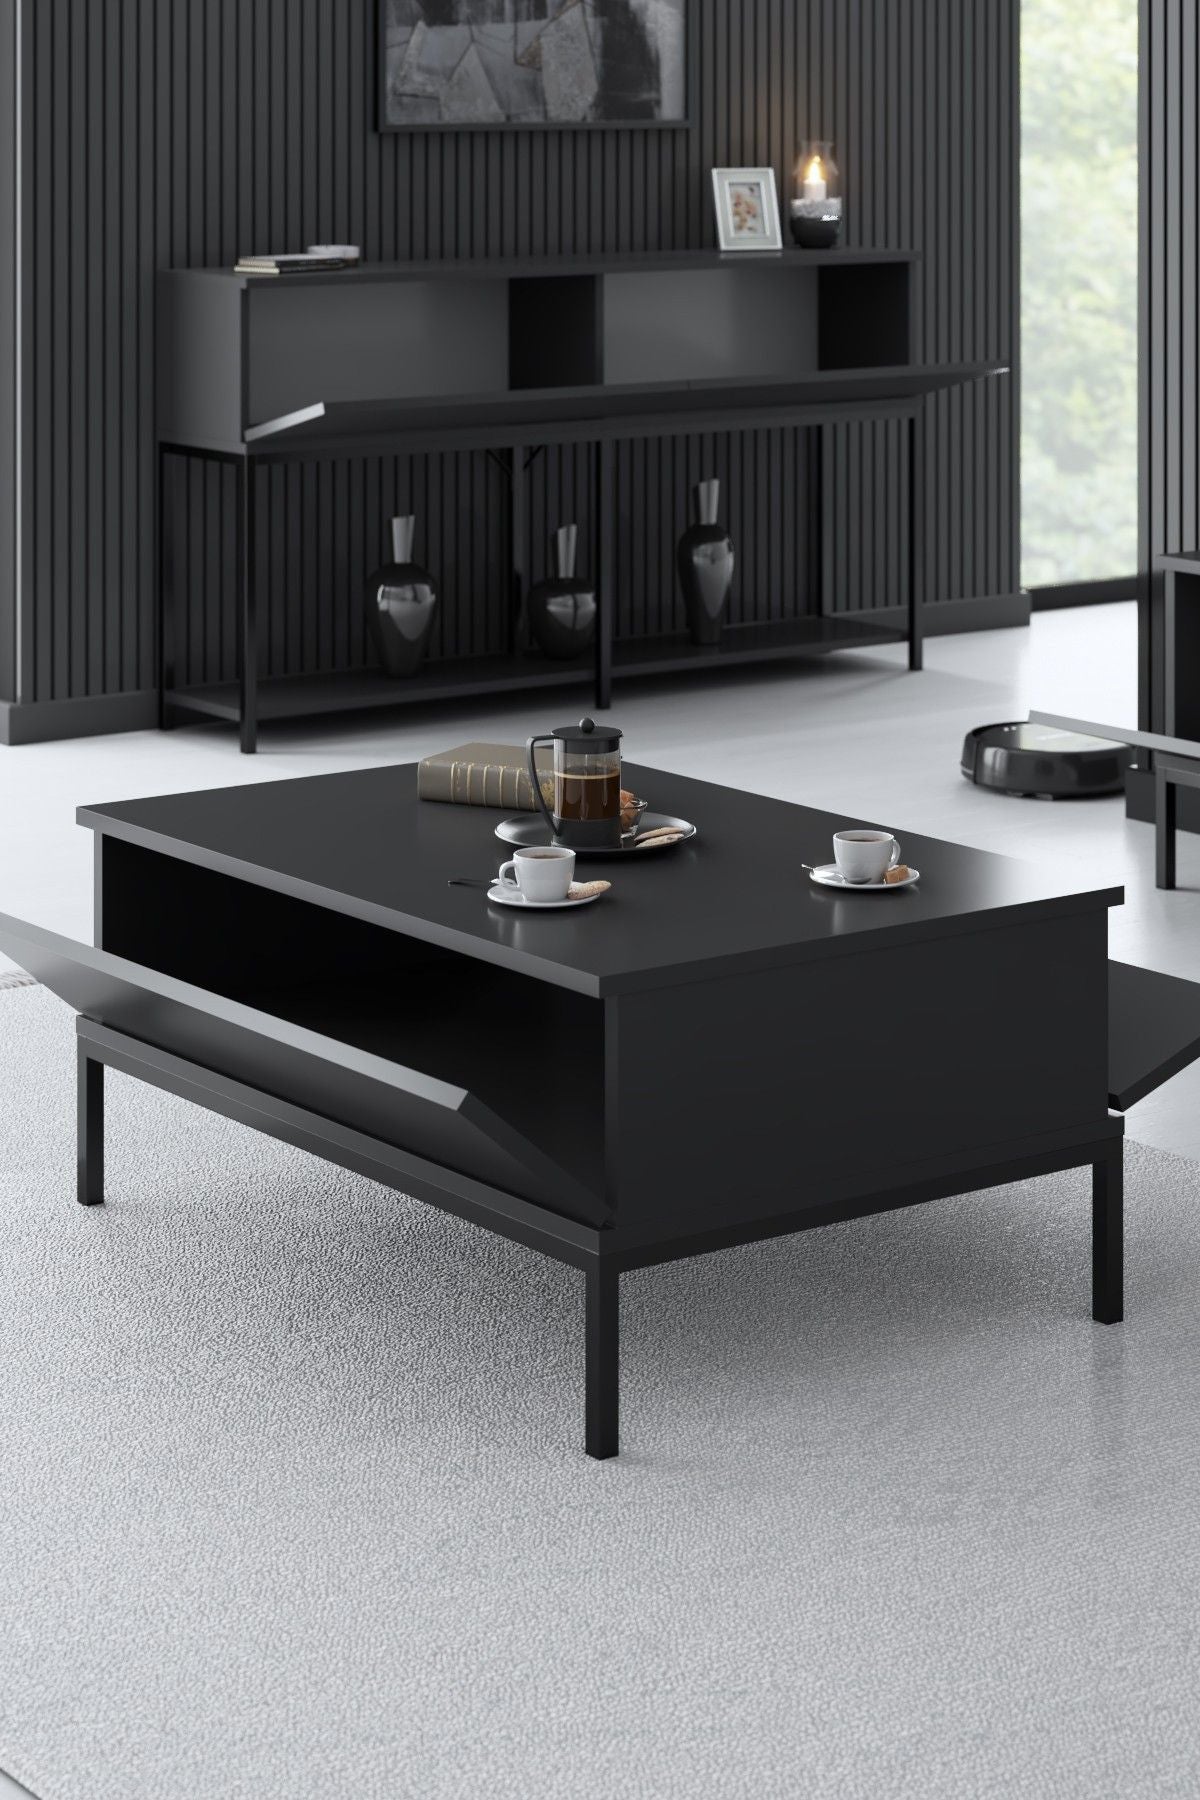 Lord - Anthracite, Black - Coffee Table